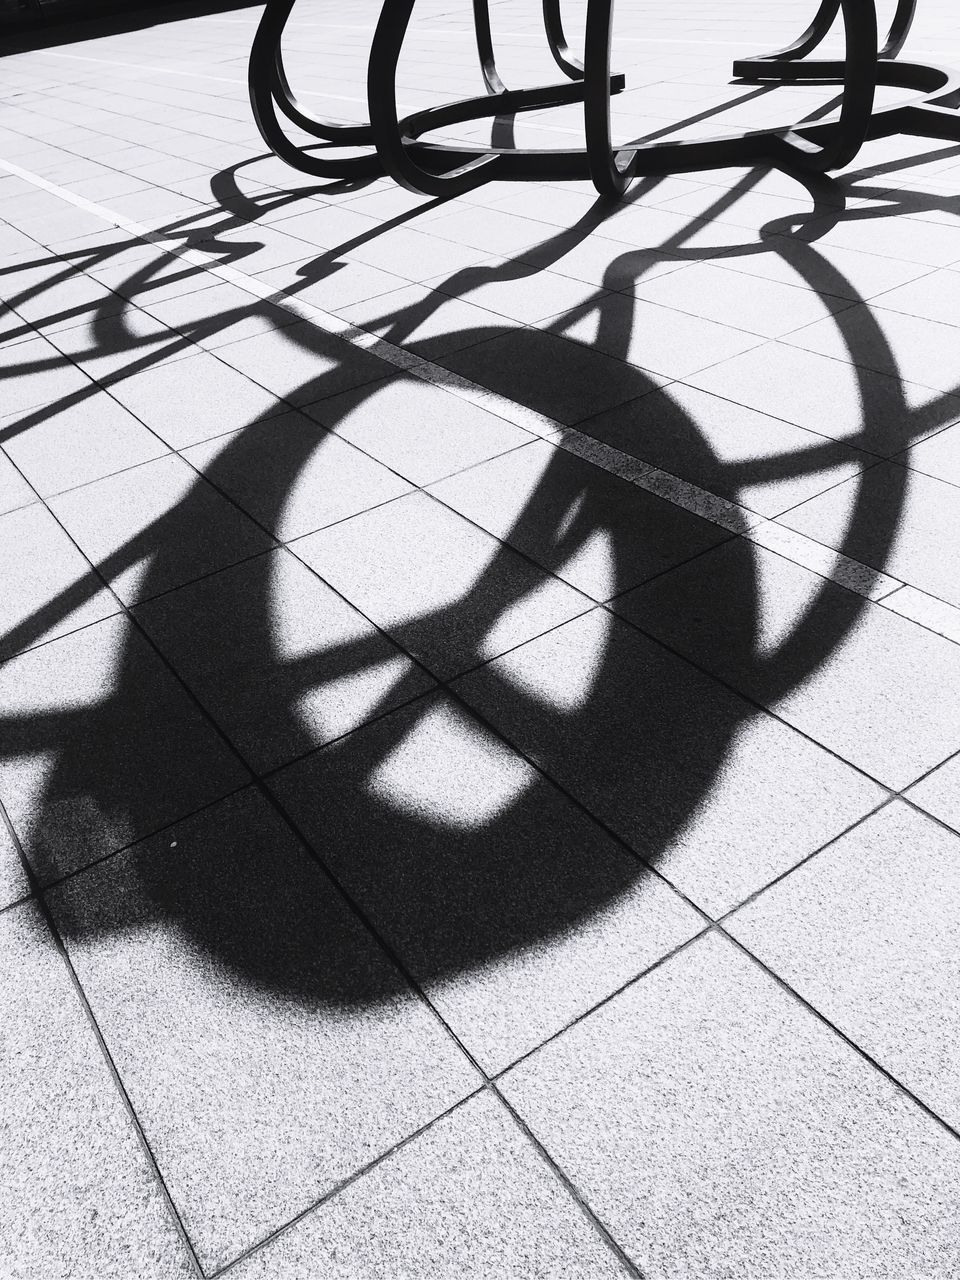 HIGH ANGLE VIEW OF SHADOW ON FOOTPATH BY SILHOUETTE TREE